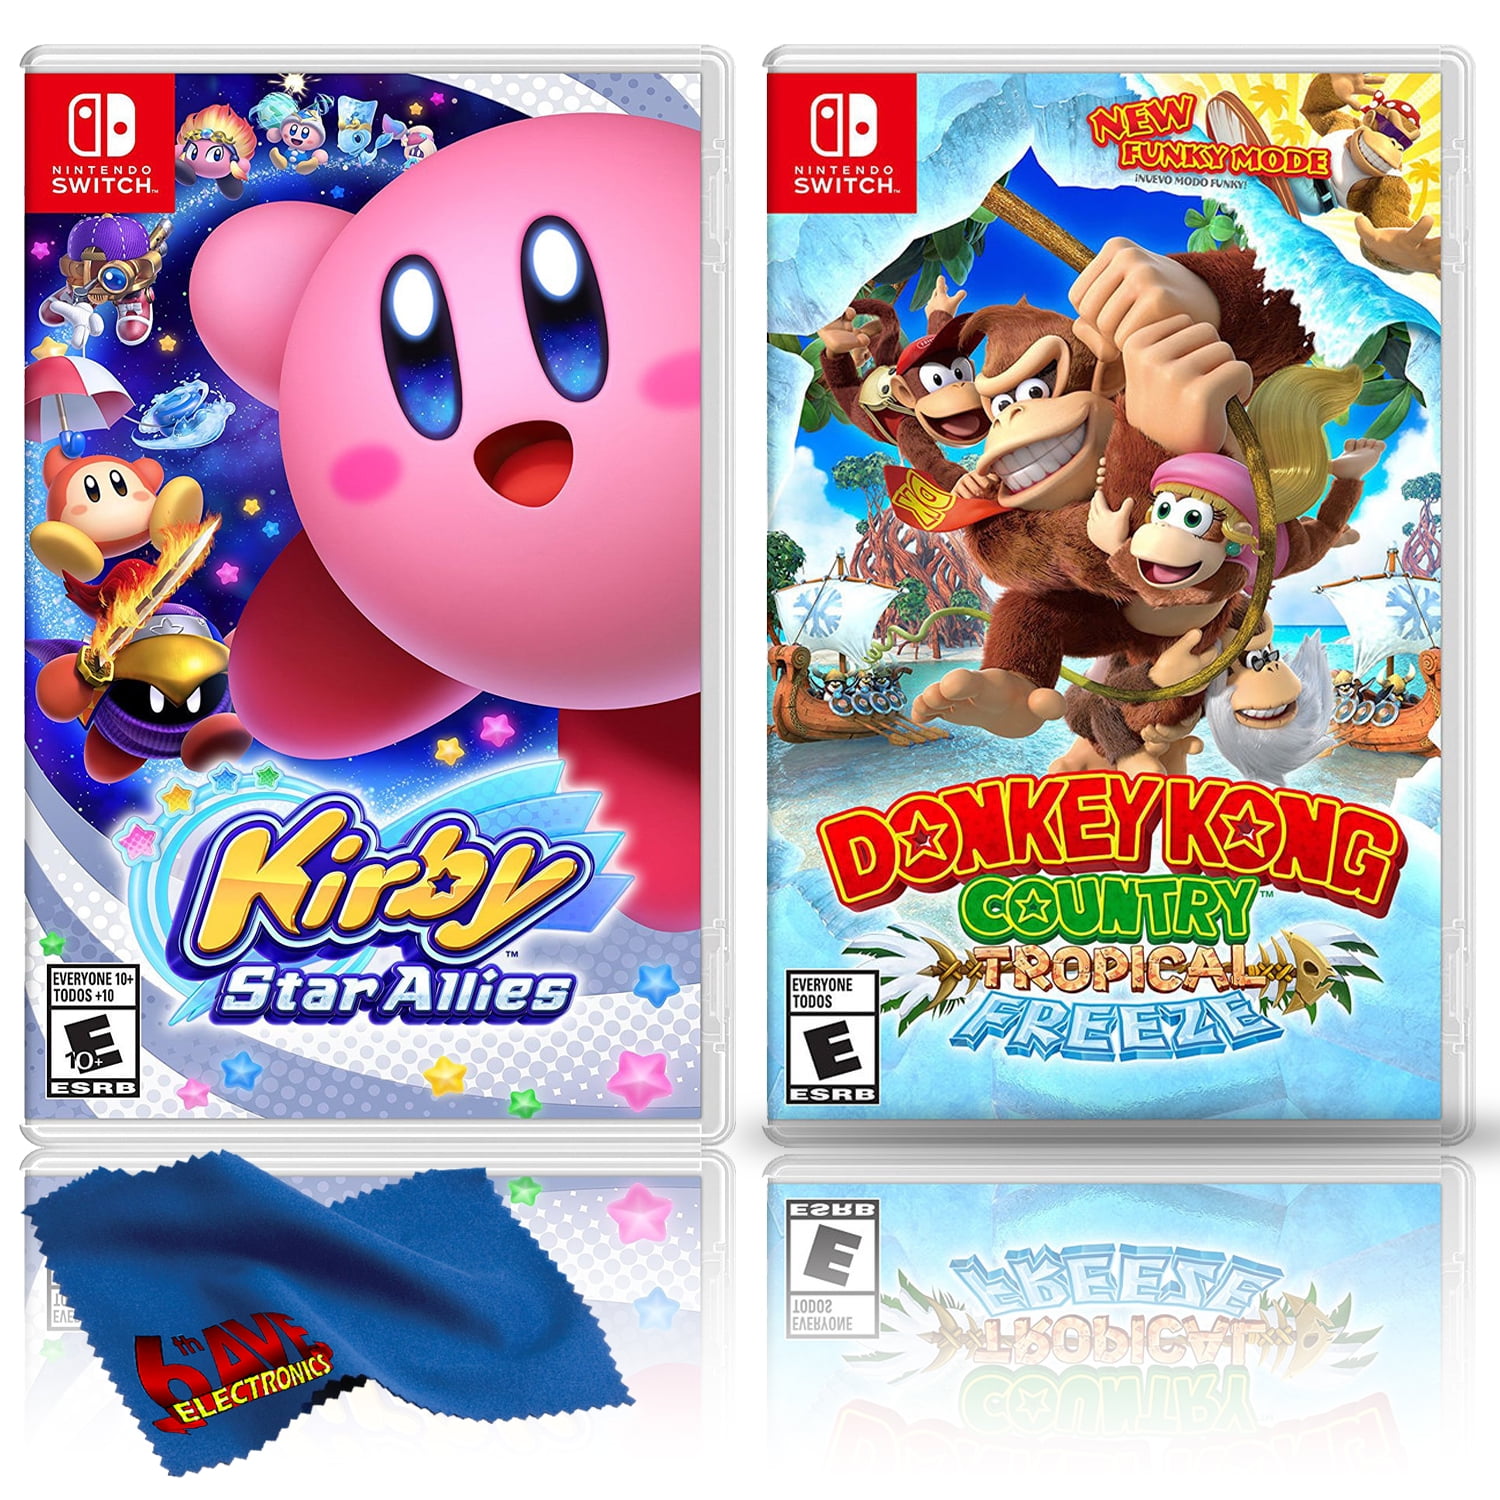 Kirby Star Allies + Donkey Kong Country - Two Games Bundle - Nintendo  Switch 